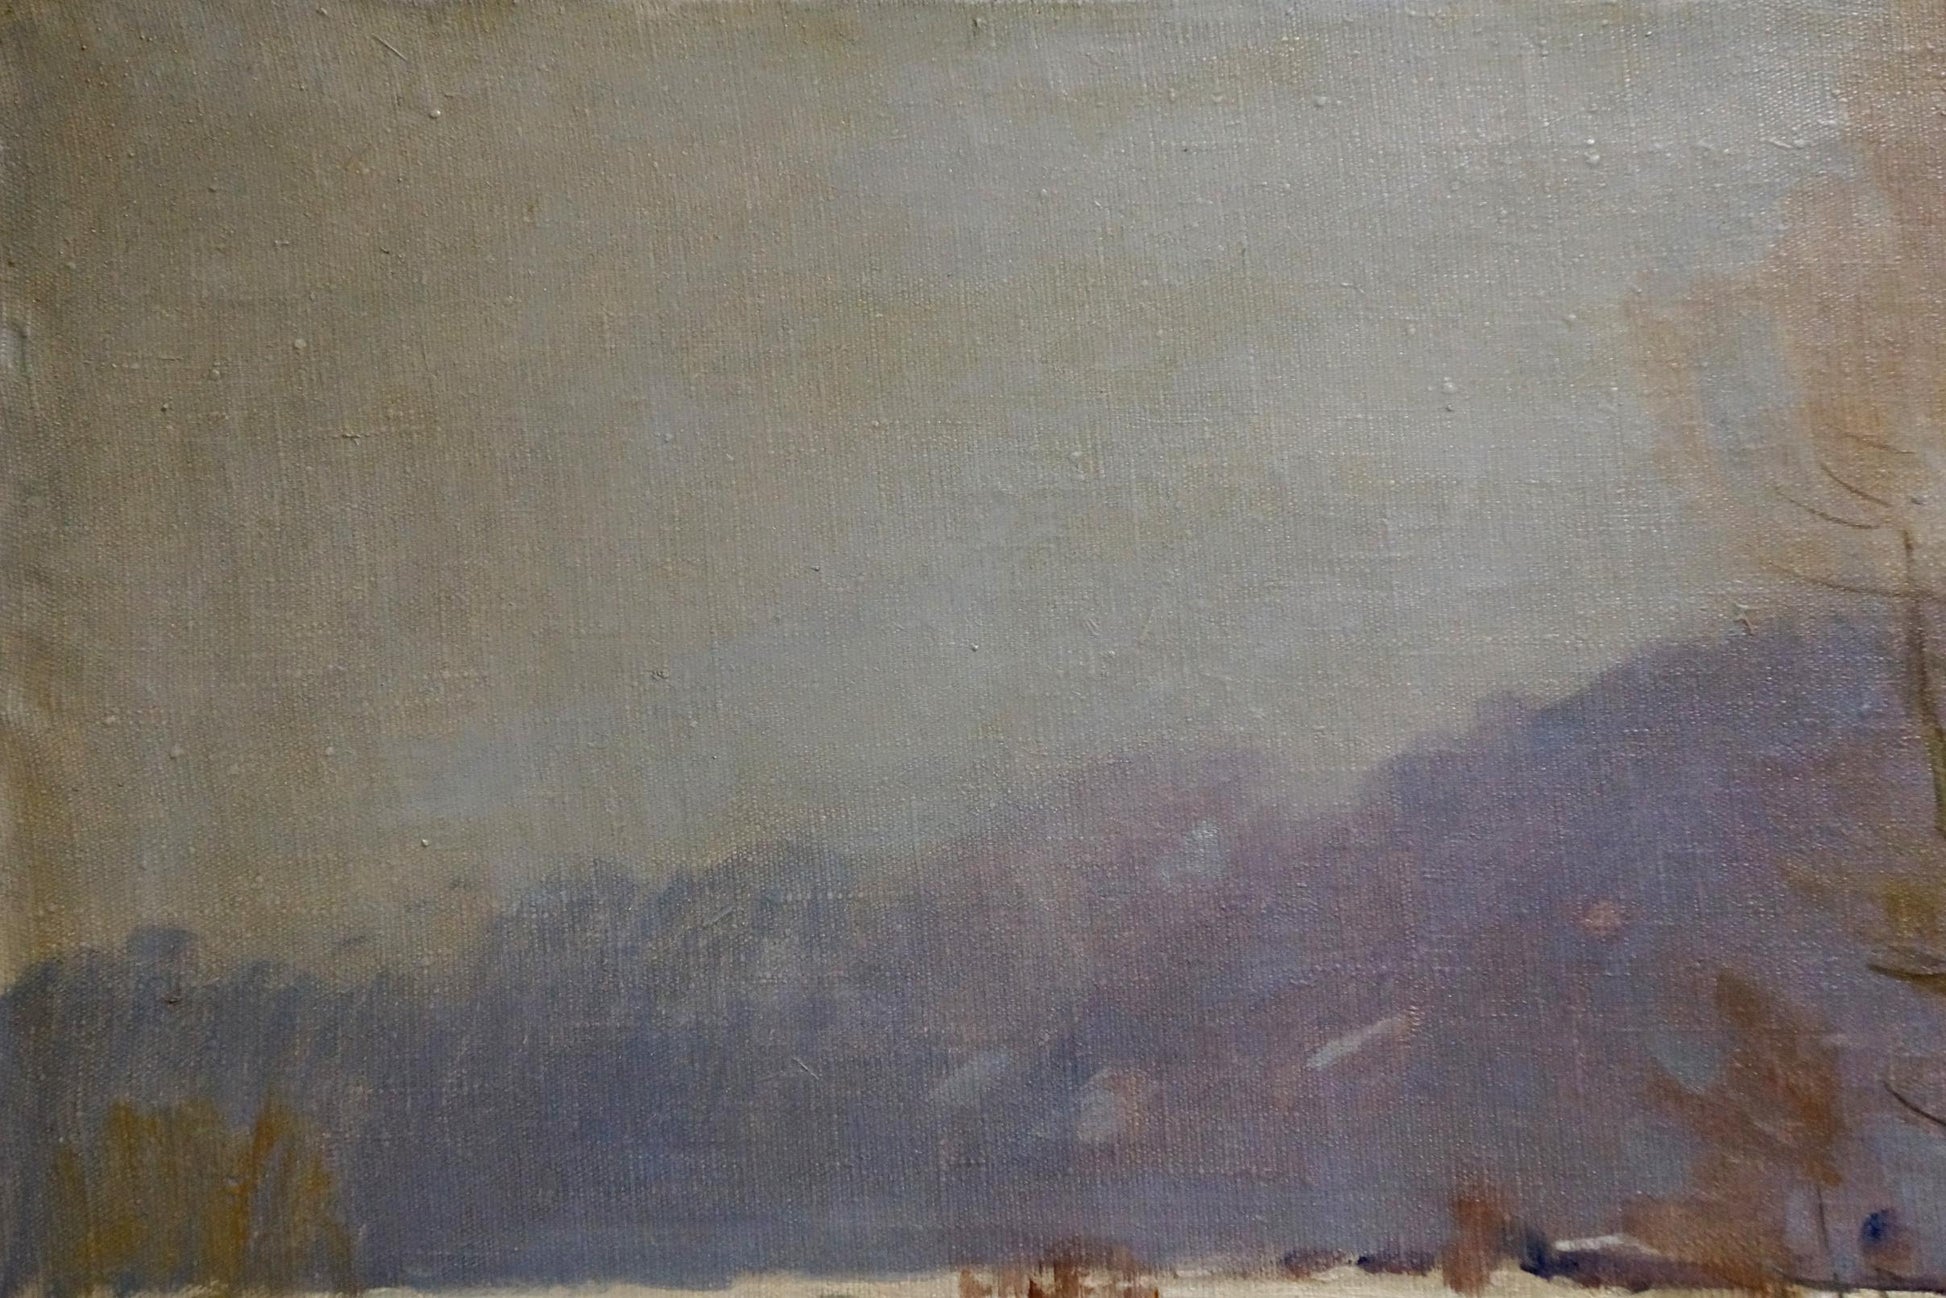 Gray Day depicted in oil by Anton Mikhailovich Kashshay